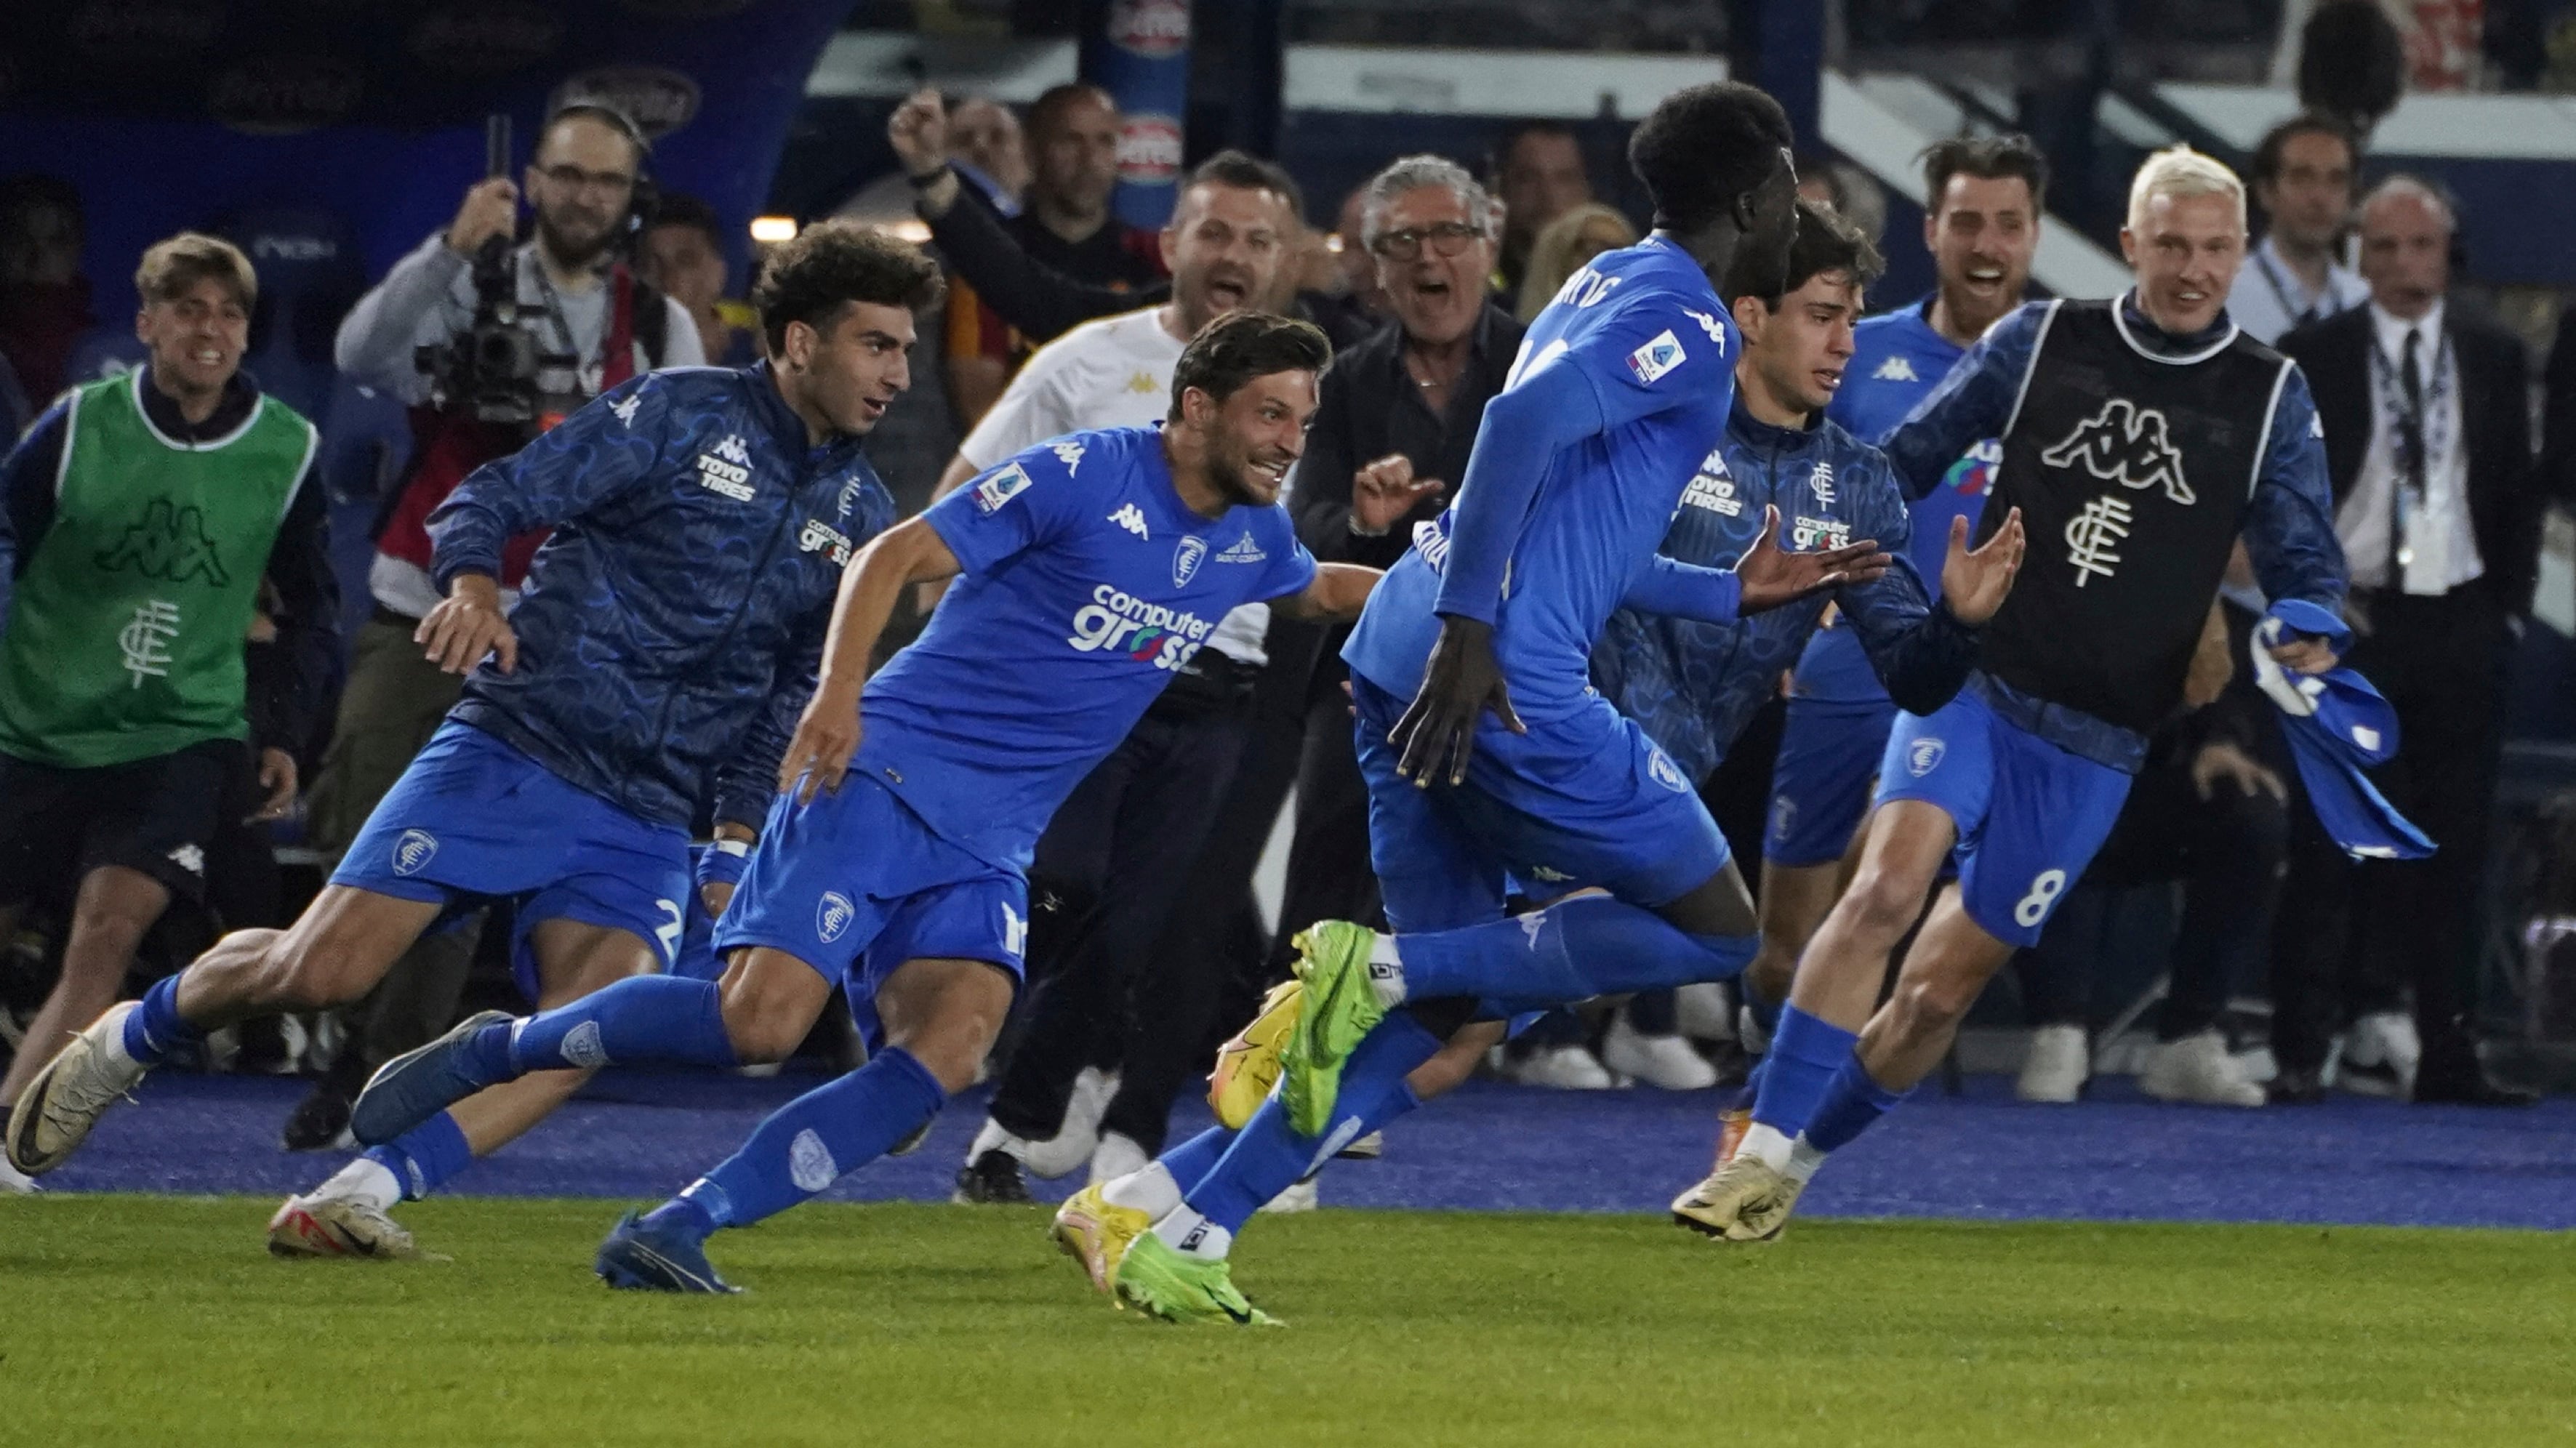 M’Baye Niang celebrates after scoring the goal which kept Empoli in Serie A (Marco Bucco/LaPresse via AP)